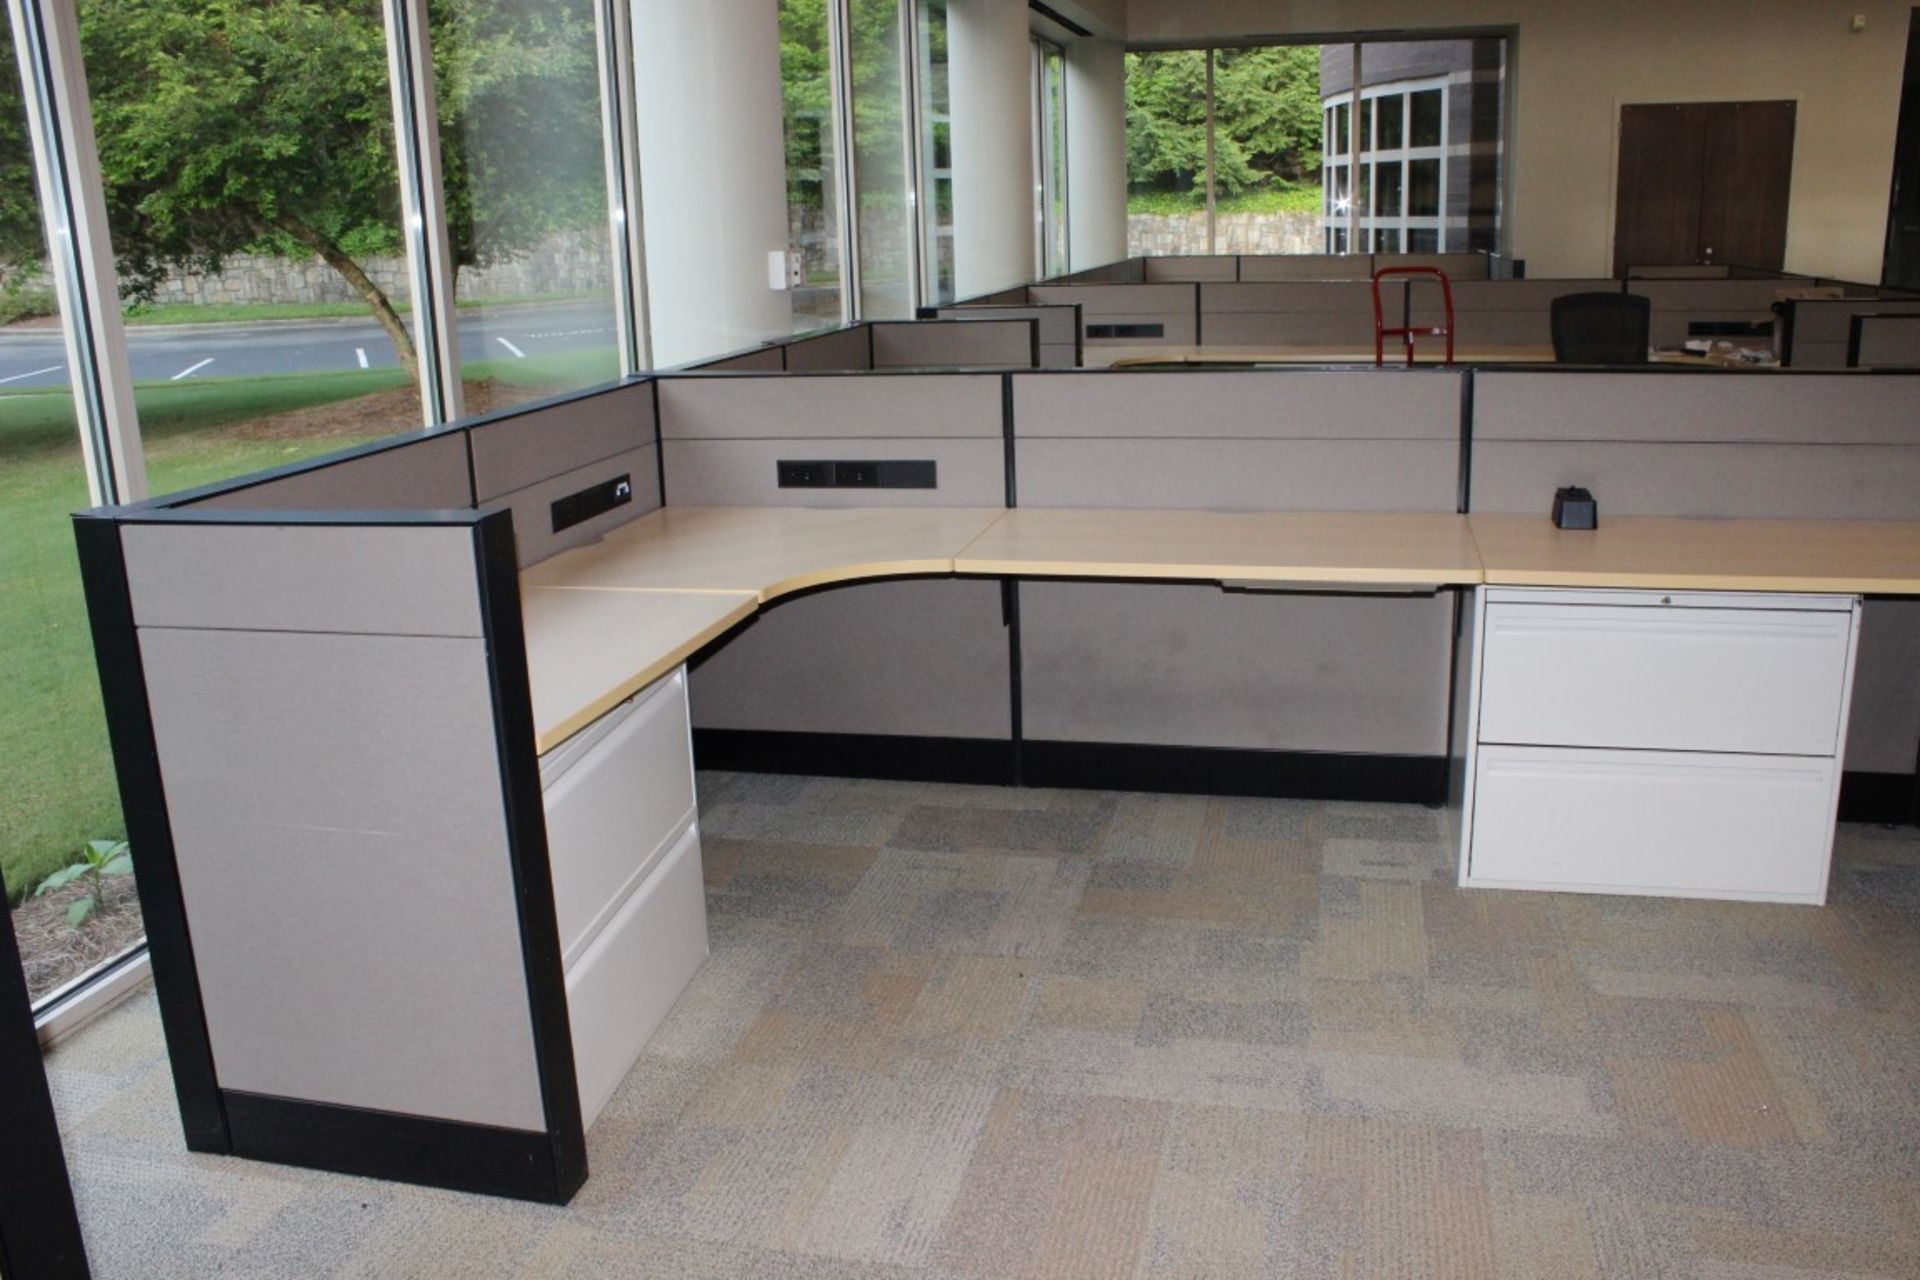 EXECUTIVE OFFICE CUBICLES. DISMANTLED & READY TO LOAD